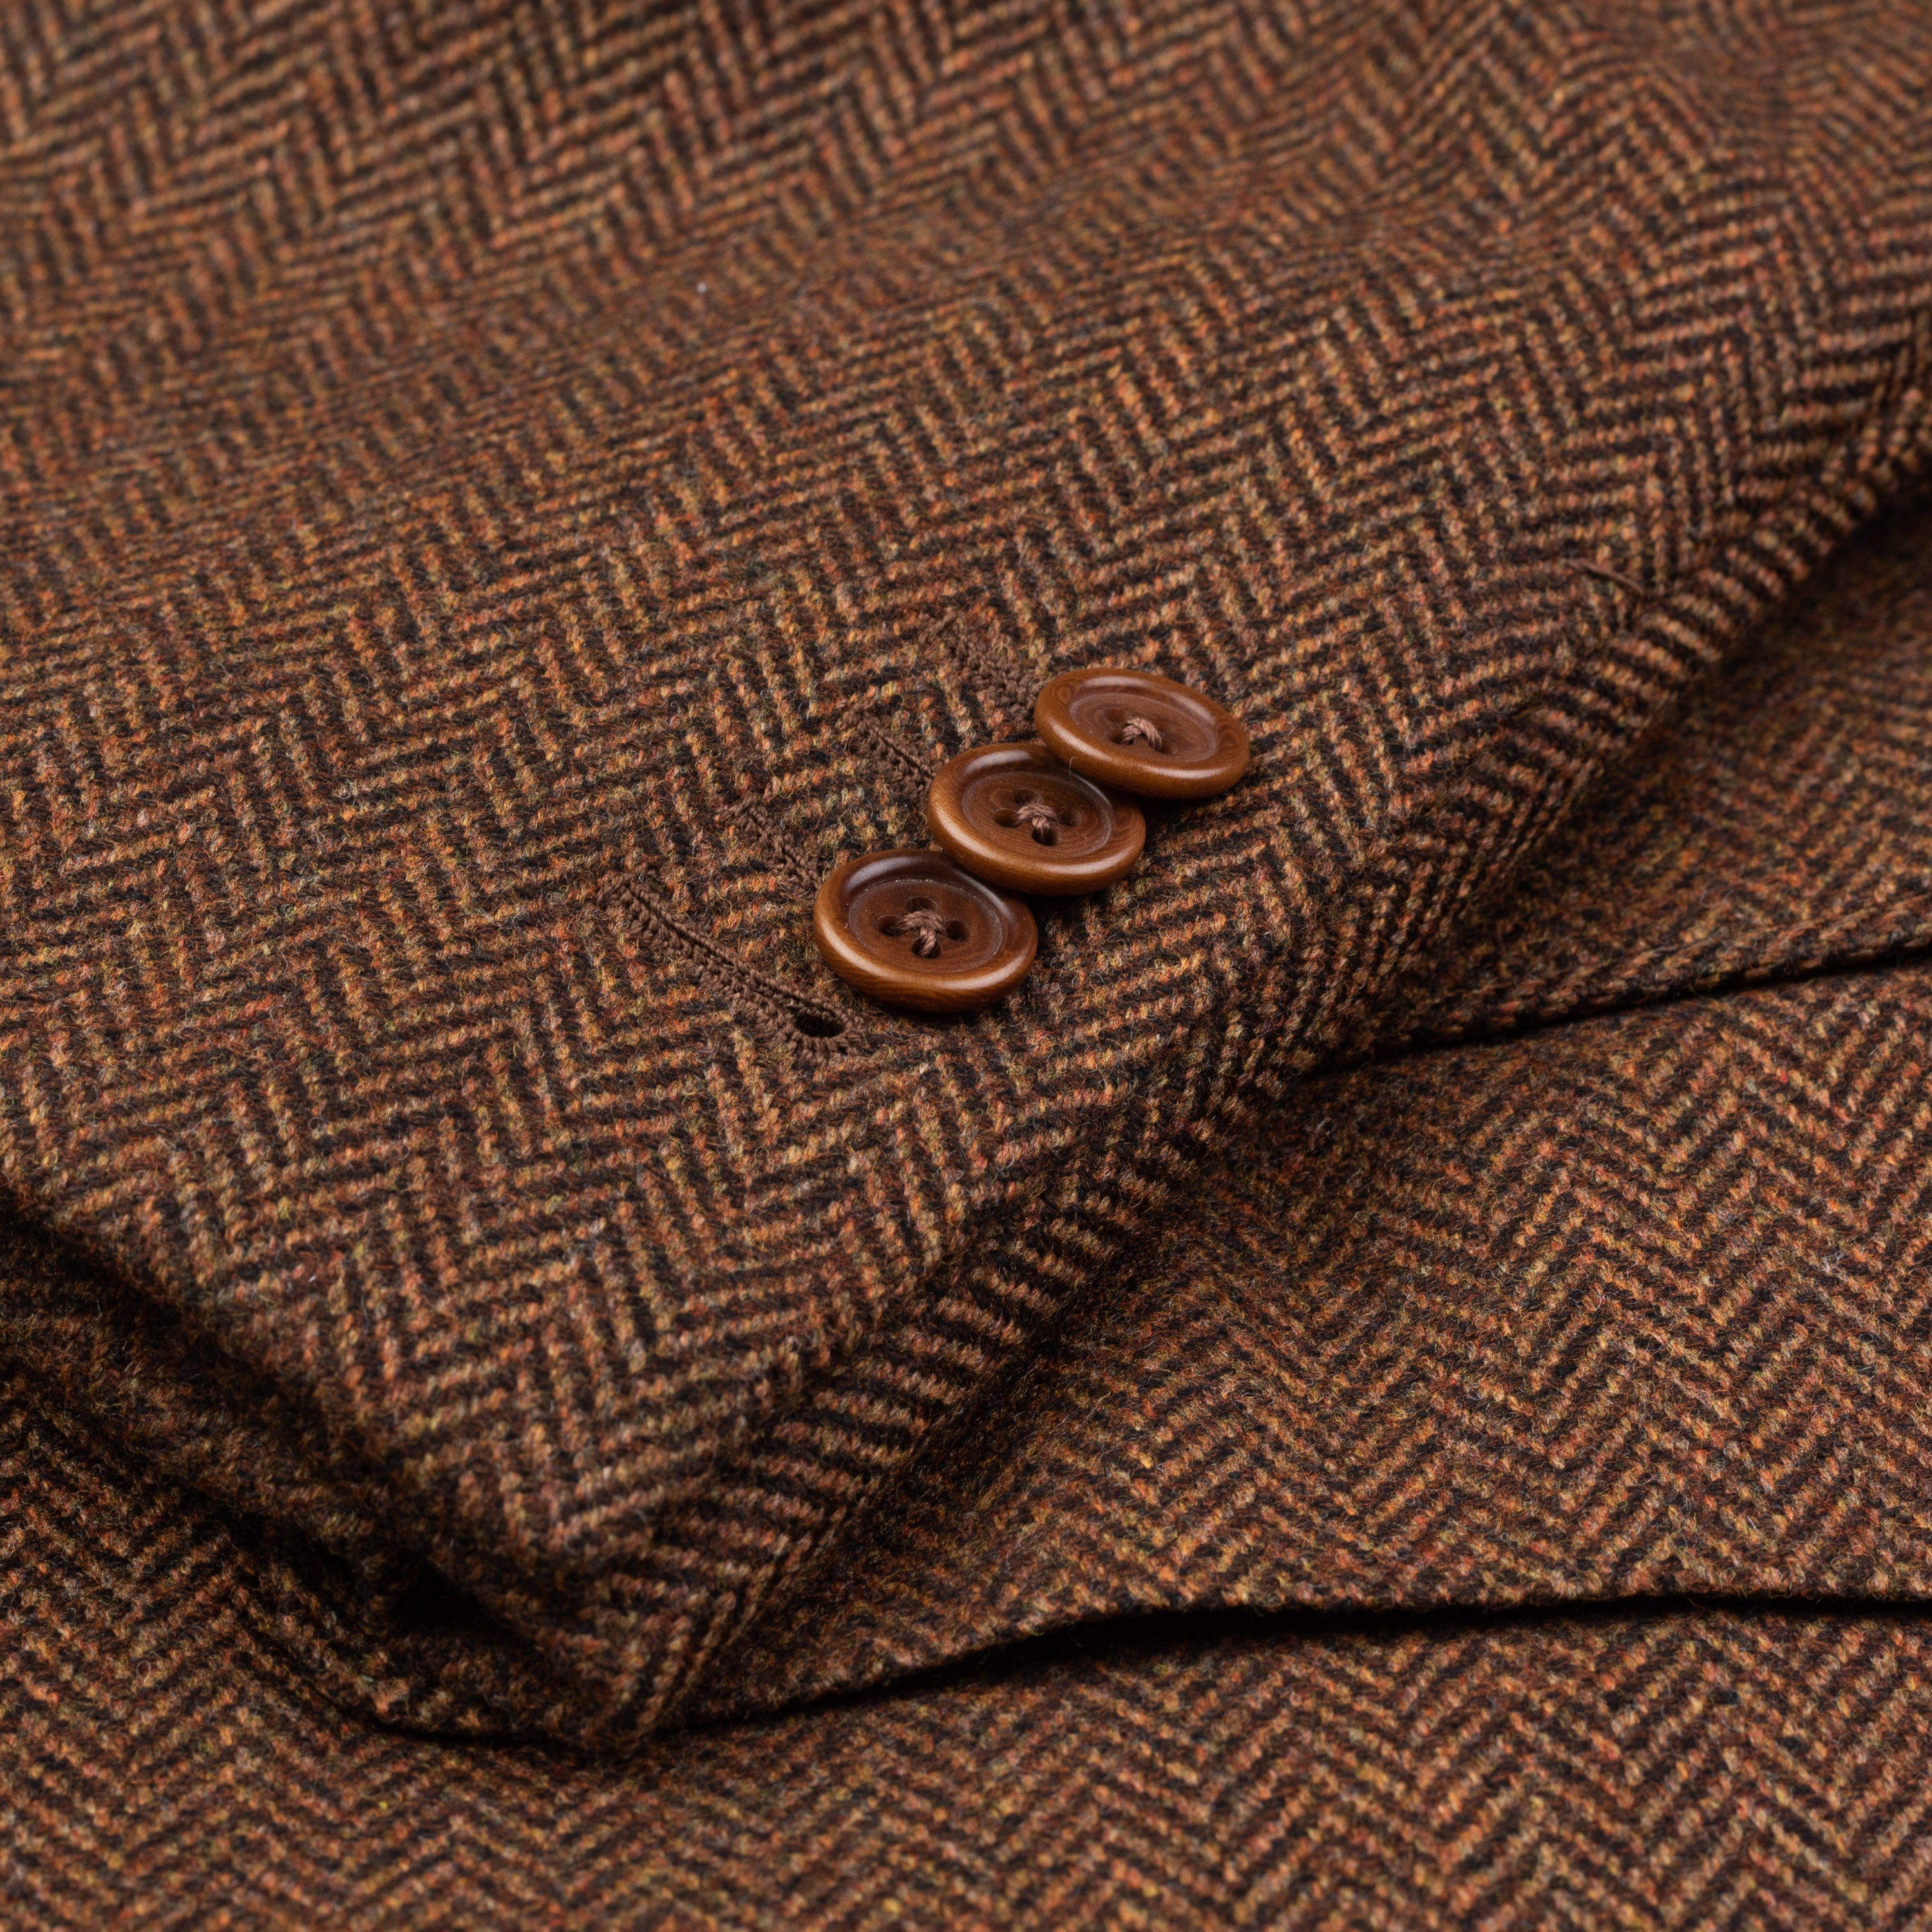 CASTANGIA 1850 Brown Wool-Cashmere Jacket EU 70 NEW US 60 Big and Tall CASTANGIA